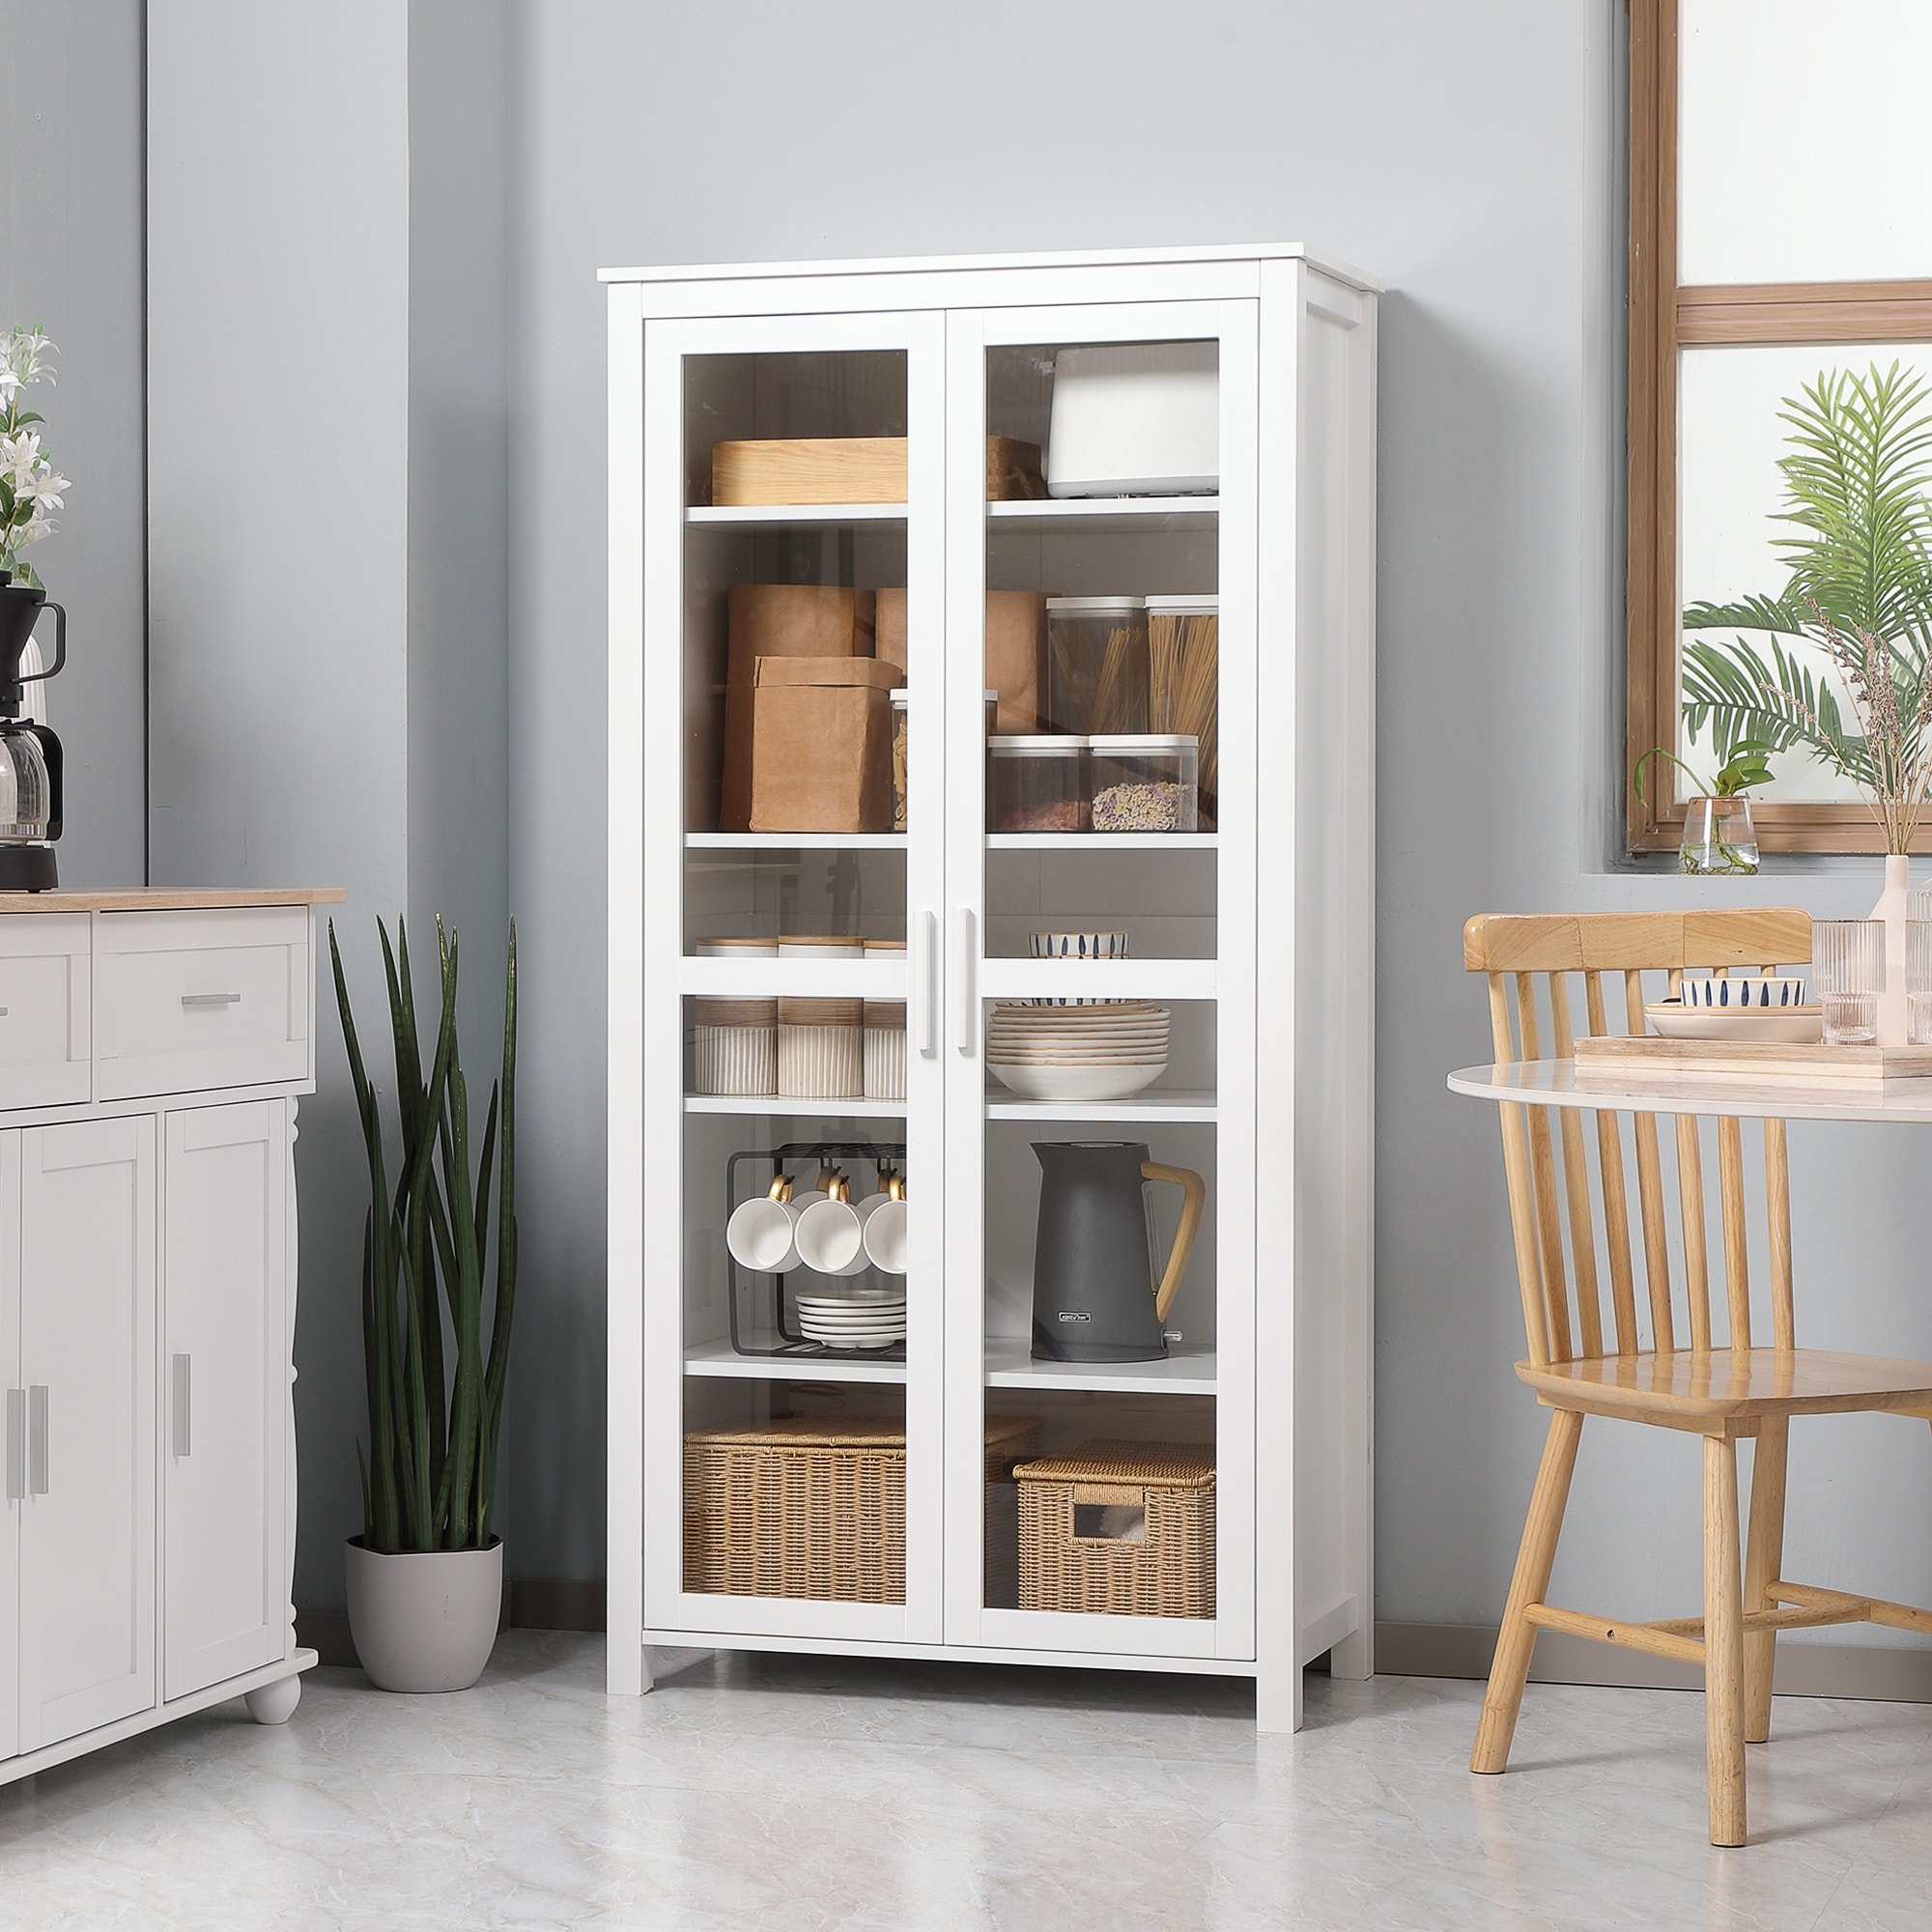 https://ak1.ostkcdn.com/images/products/is/images/direct/162013e7cd9ce8b3c51705728a55a6d631a5a56d/HOMCOM-Freestanding-Kitchen-Pantry%2C-5-tier-Storage-Cabinet-with-Adjustable-Shelves-and-2-Glass-Doors%2C-White.jpg